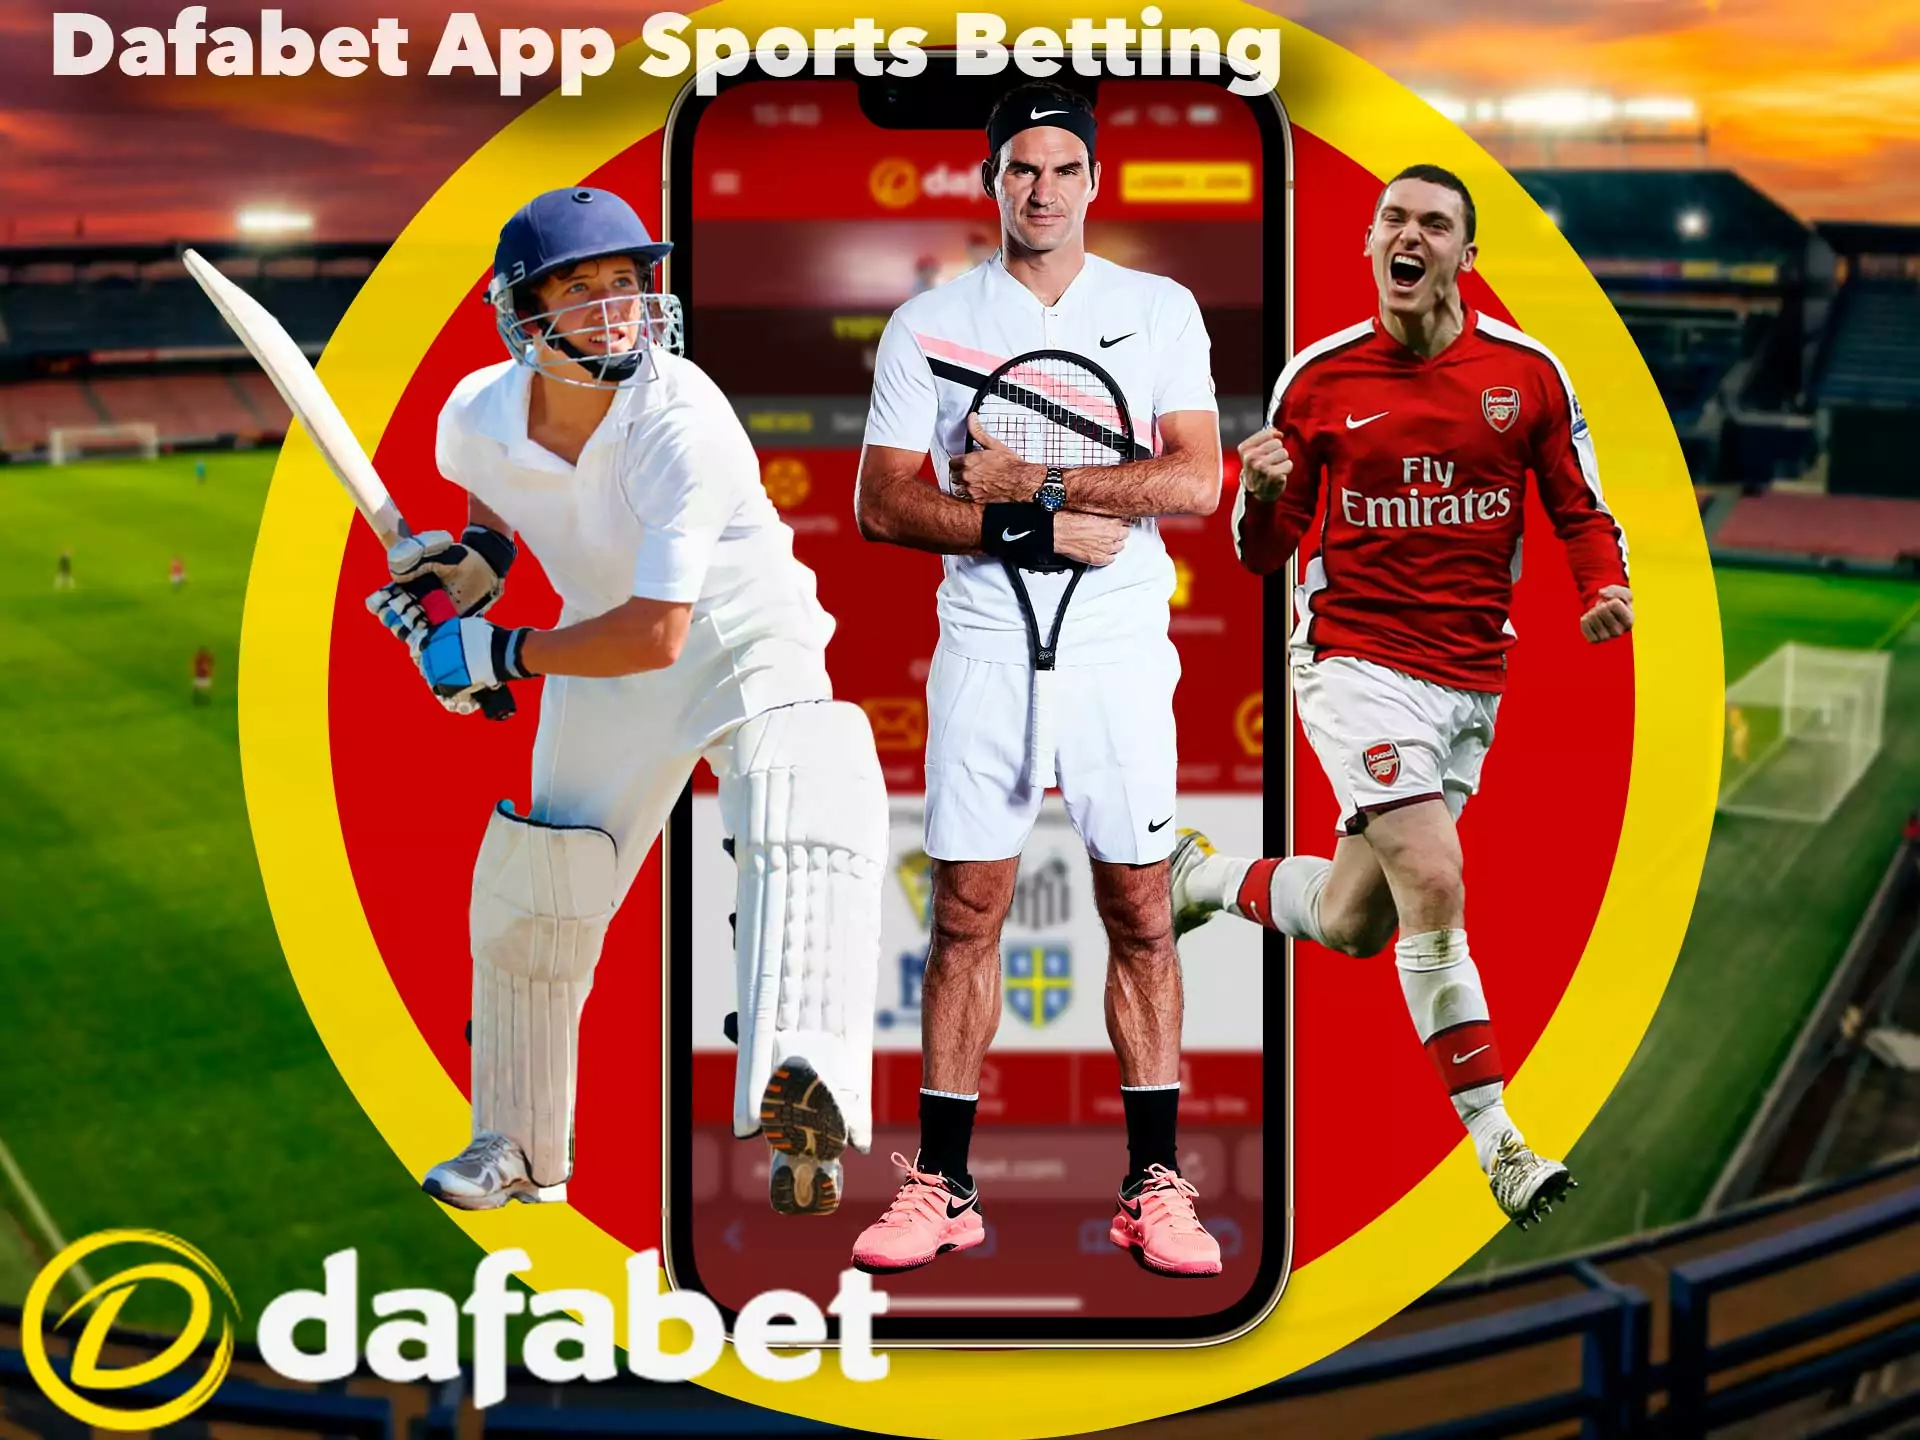 Rich selection of sports content at Dafabet.